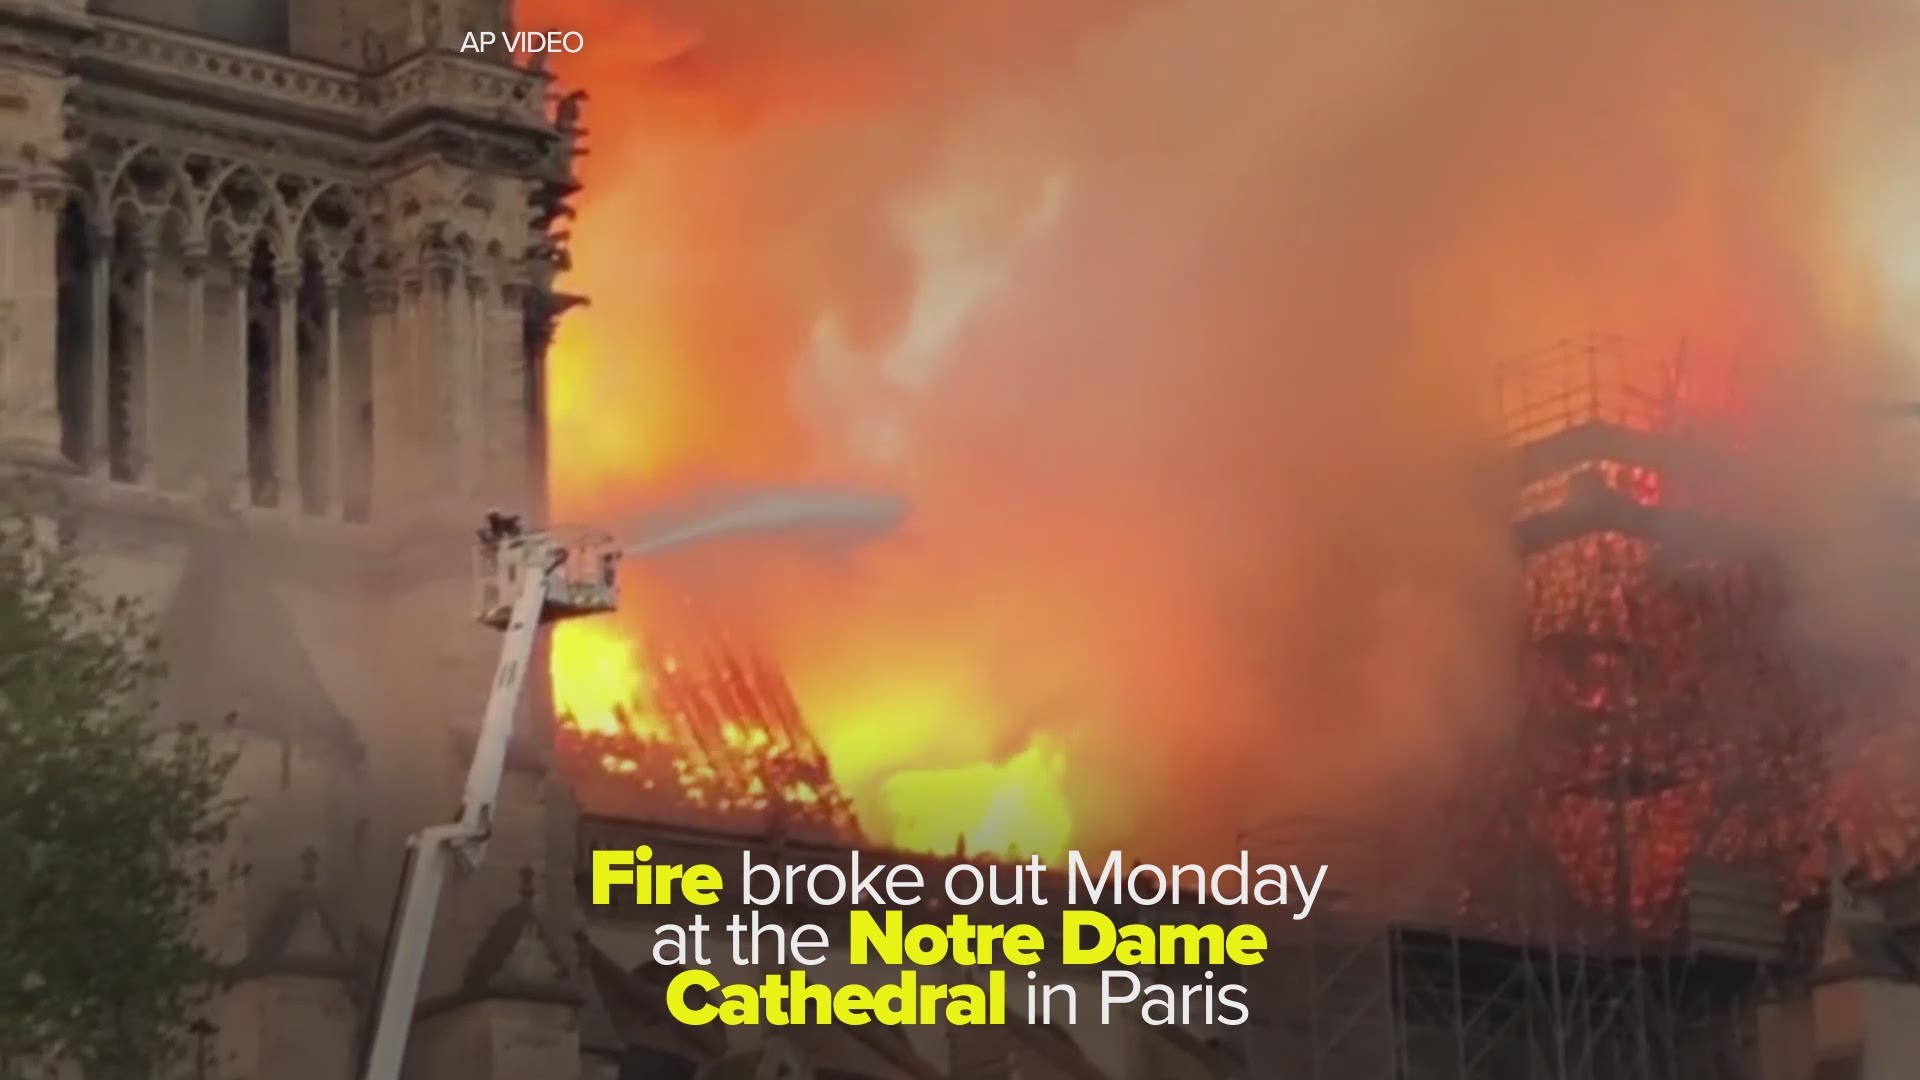 A massive fire broke out at the Notre Dame Cathedral in Paris, France. The fire threatens more than 800 years of history.